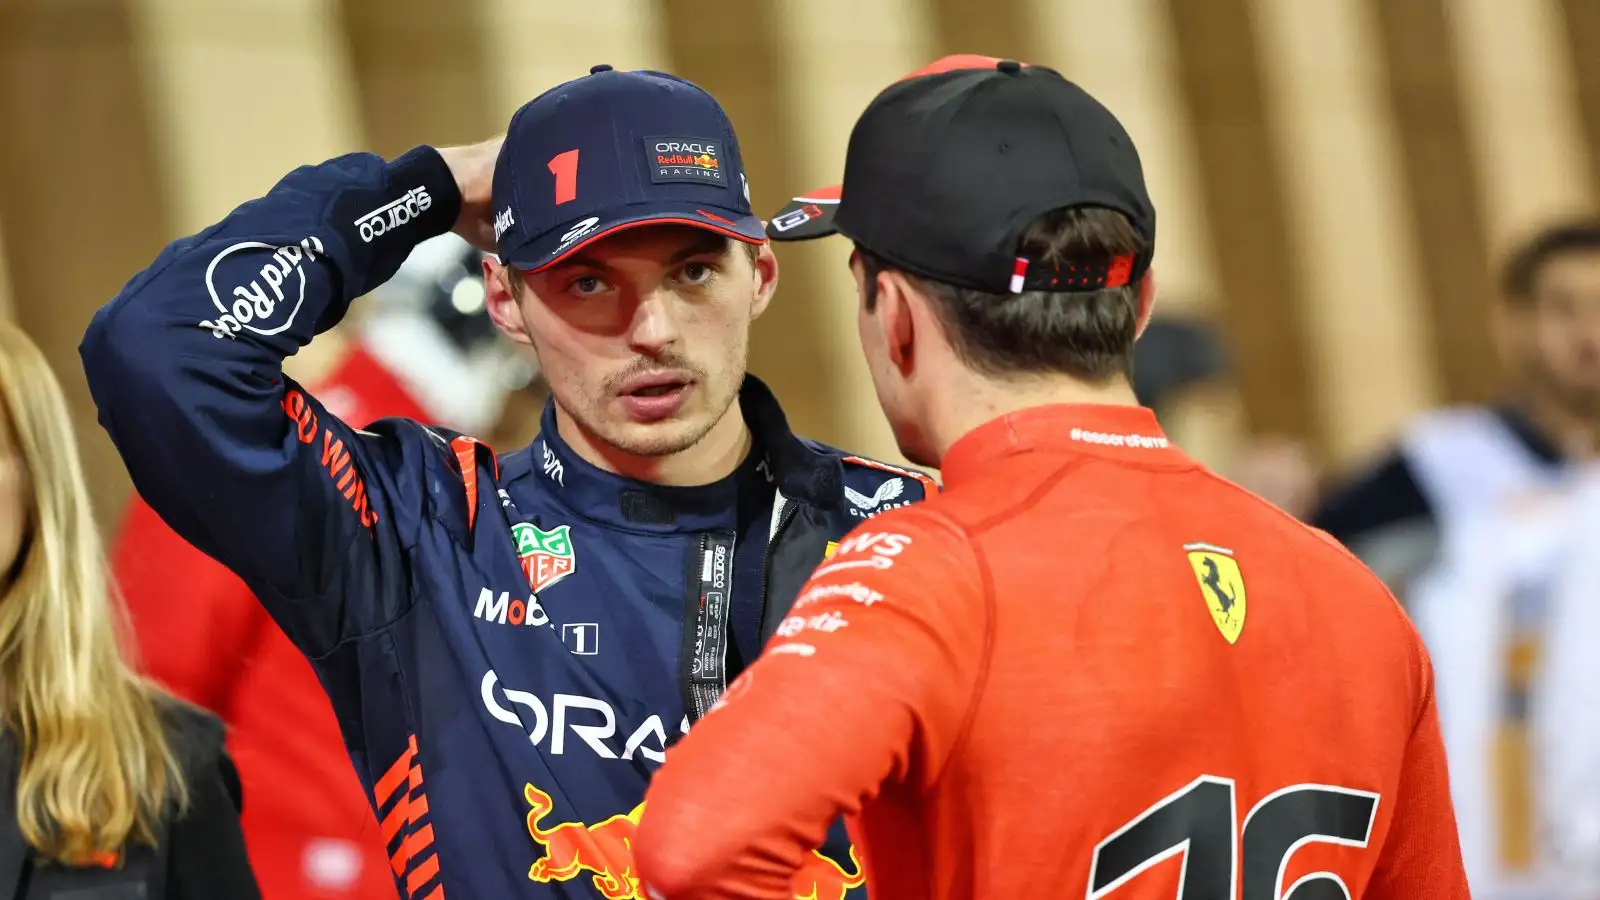 Max Verstappen and Charles Leclerc